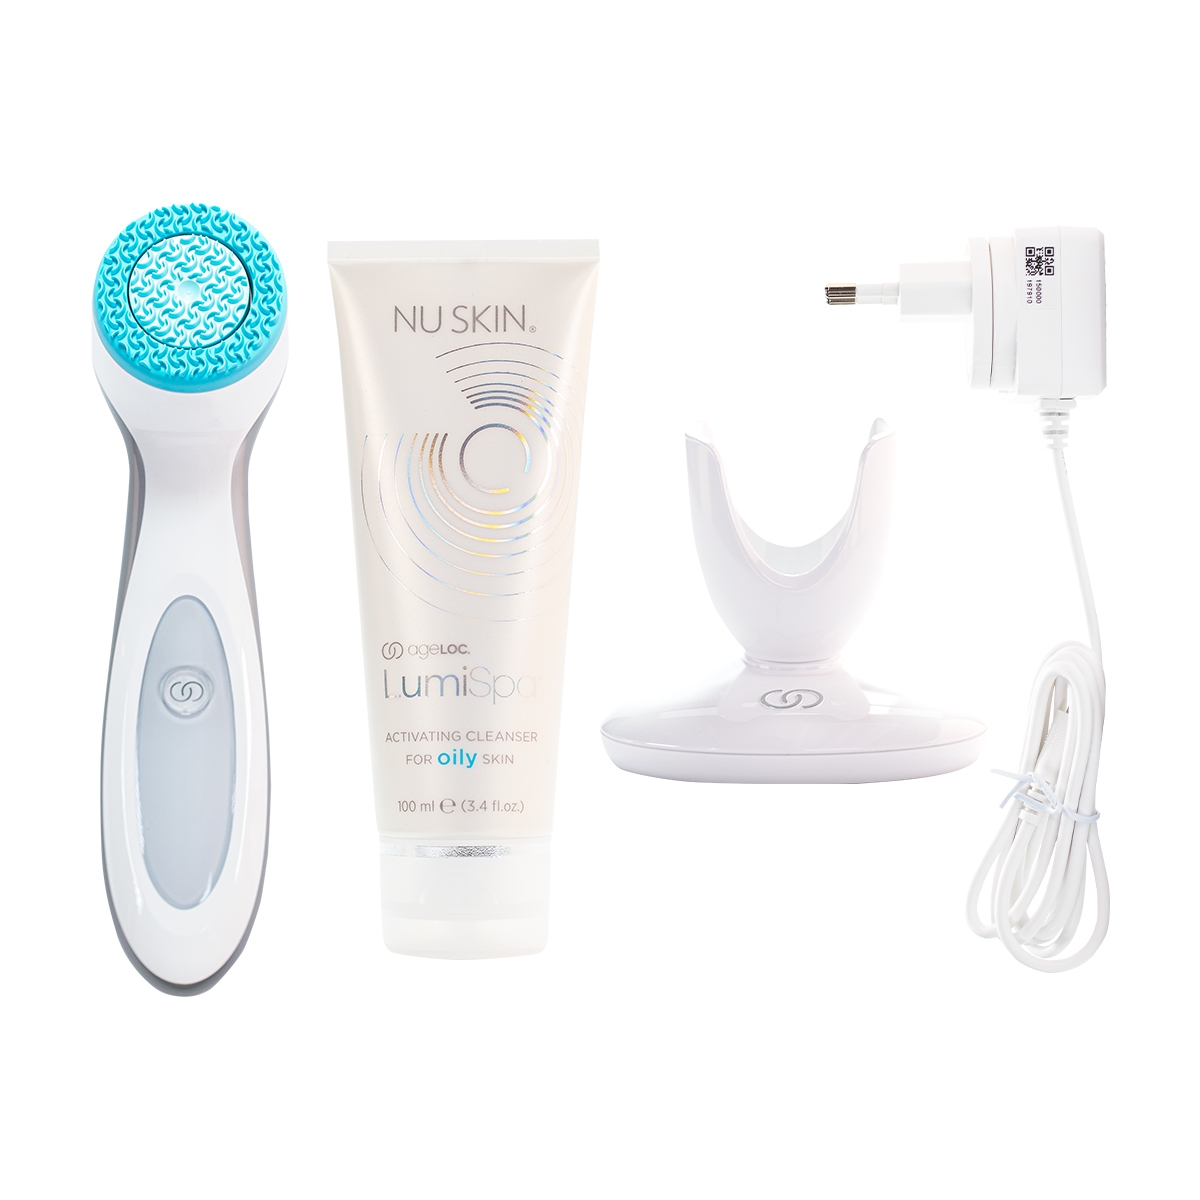 ageLOC LumiSpa Beauty Device Face Cleansing Kit | Nu Skin